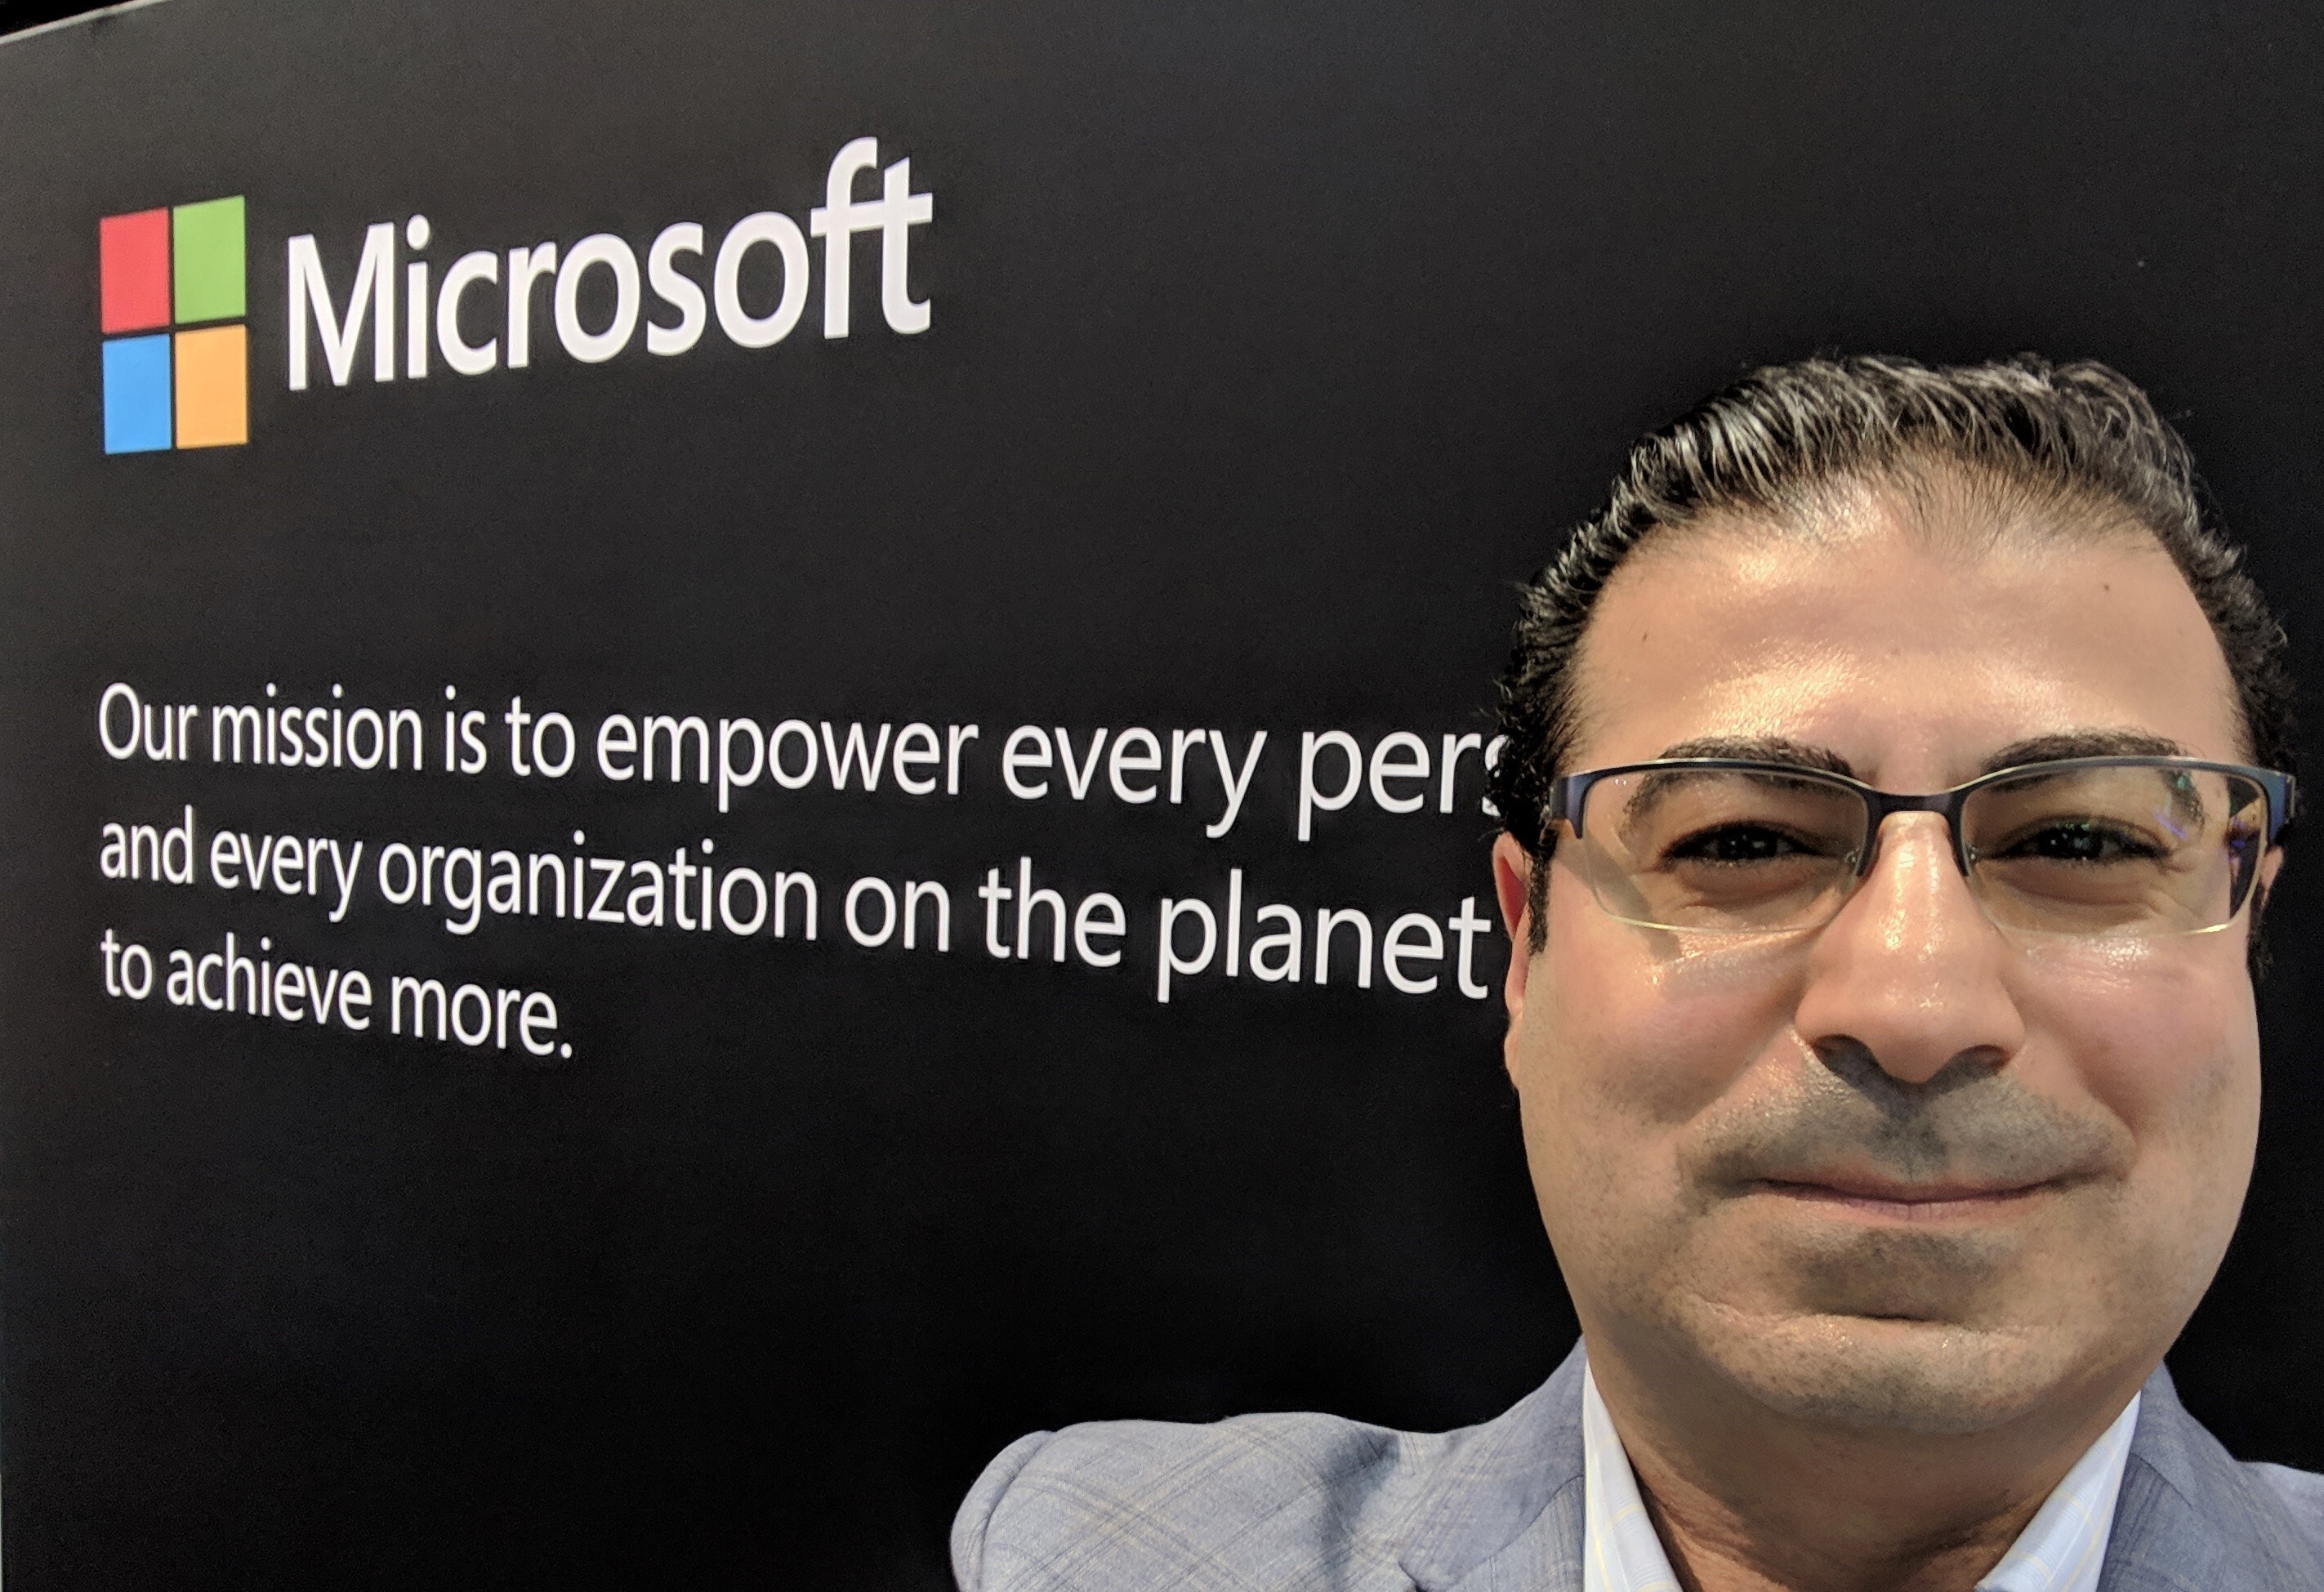 Man standing in front of Microsoft logo and tag line.